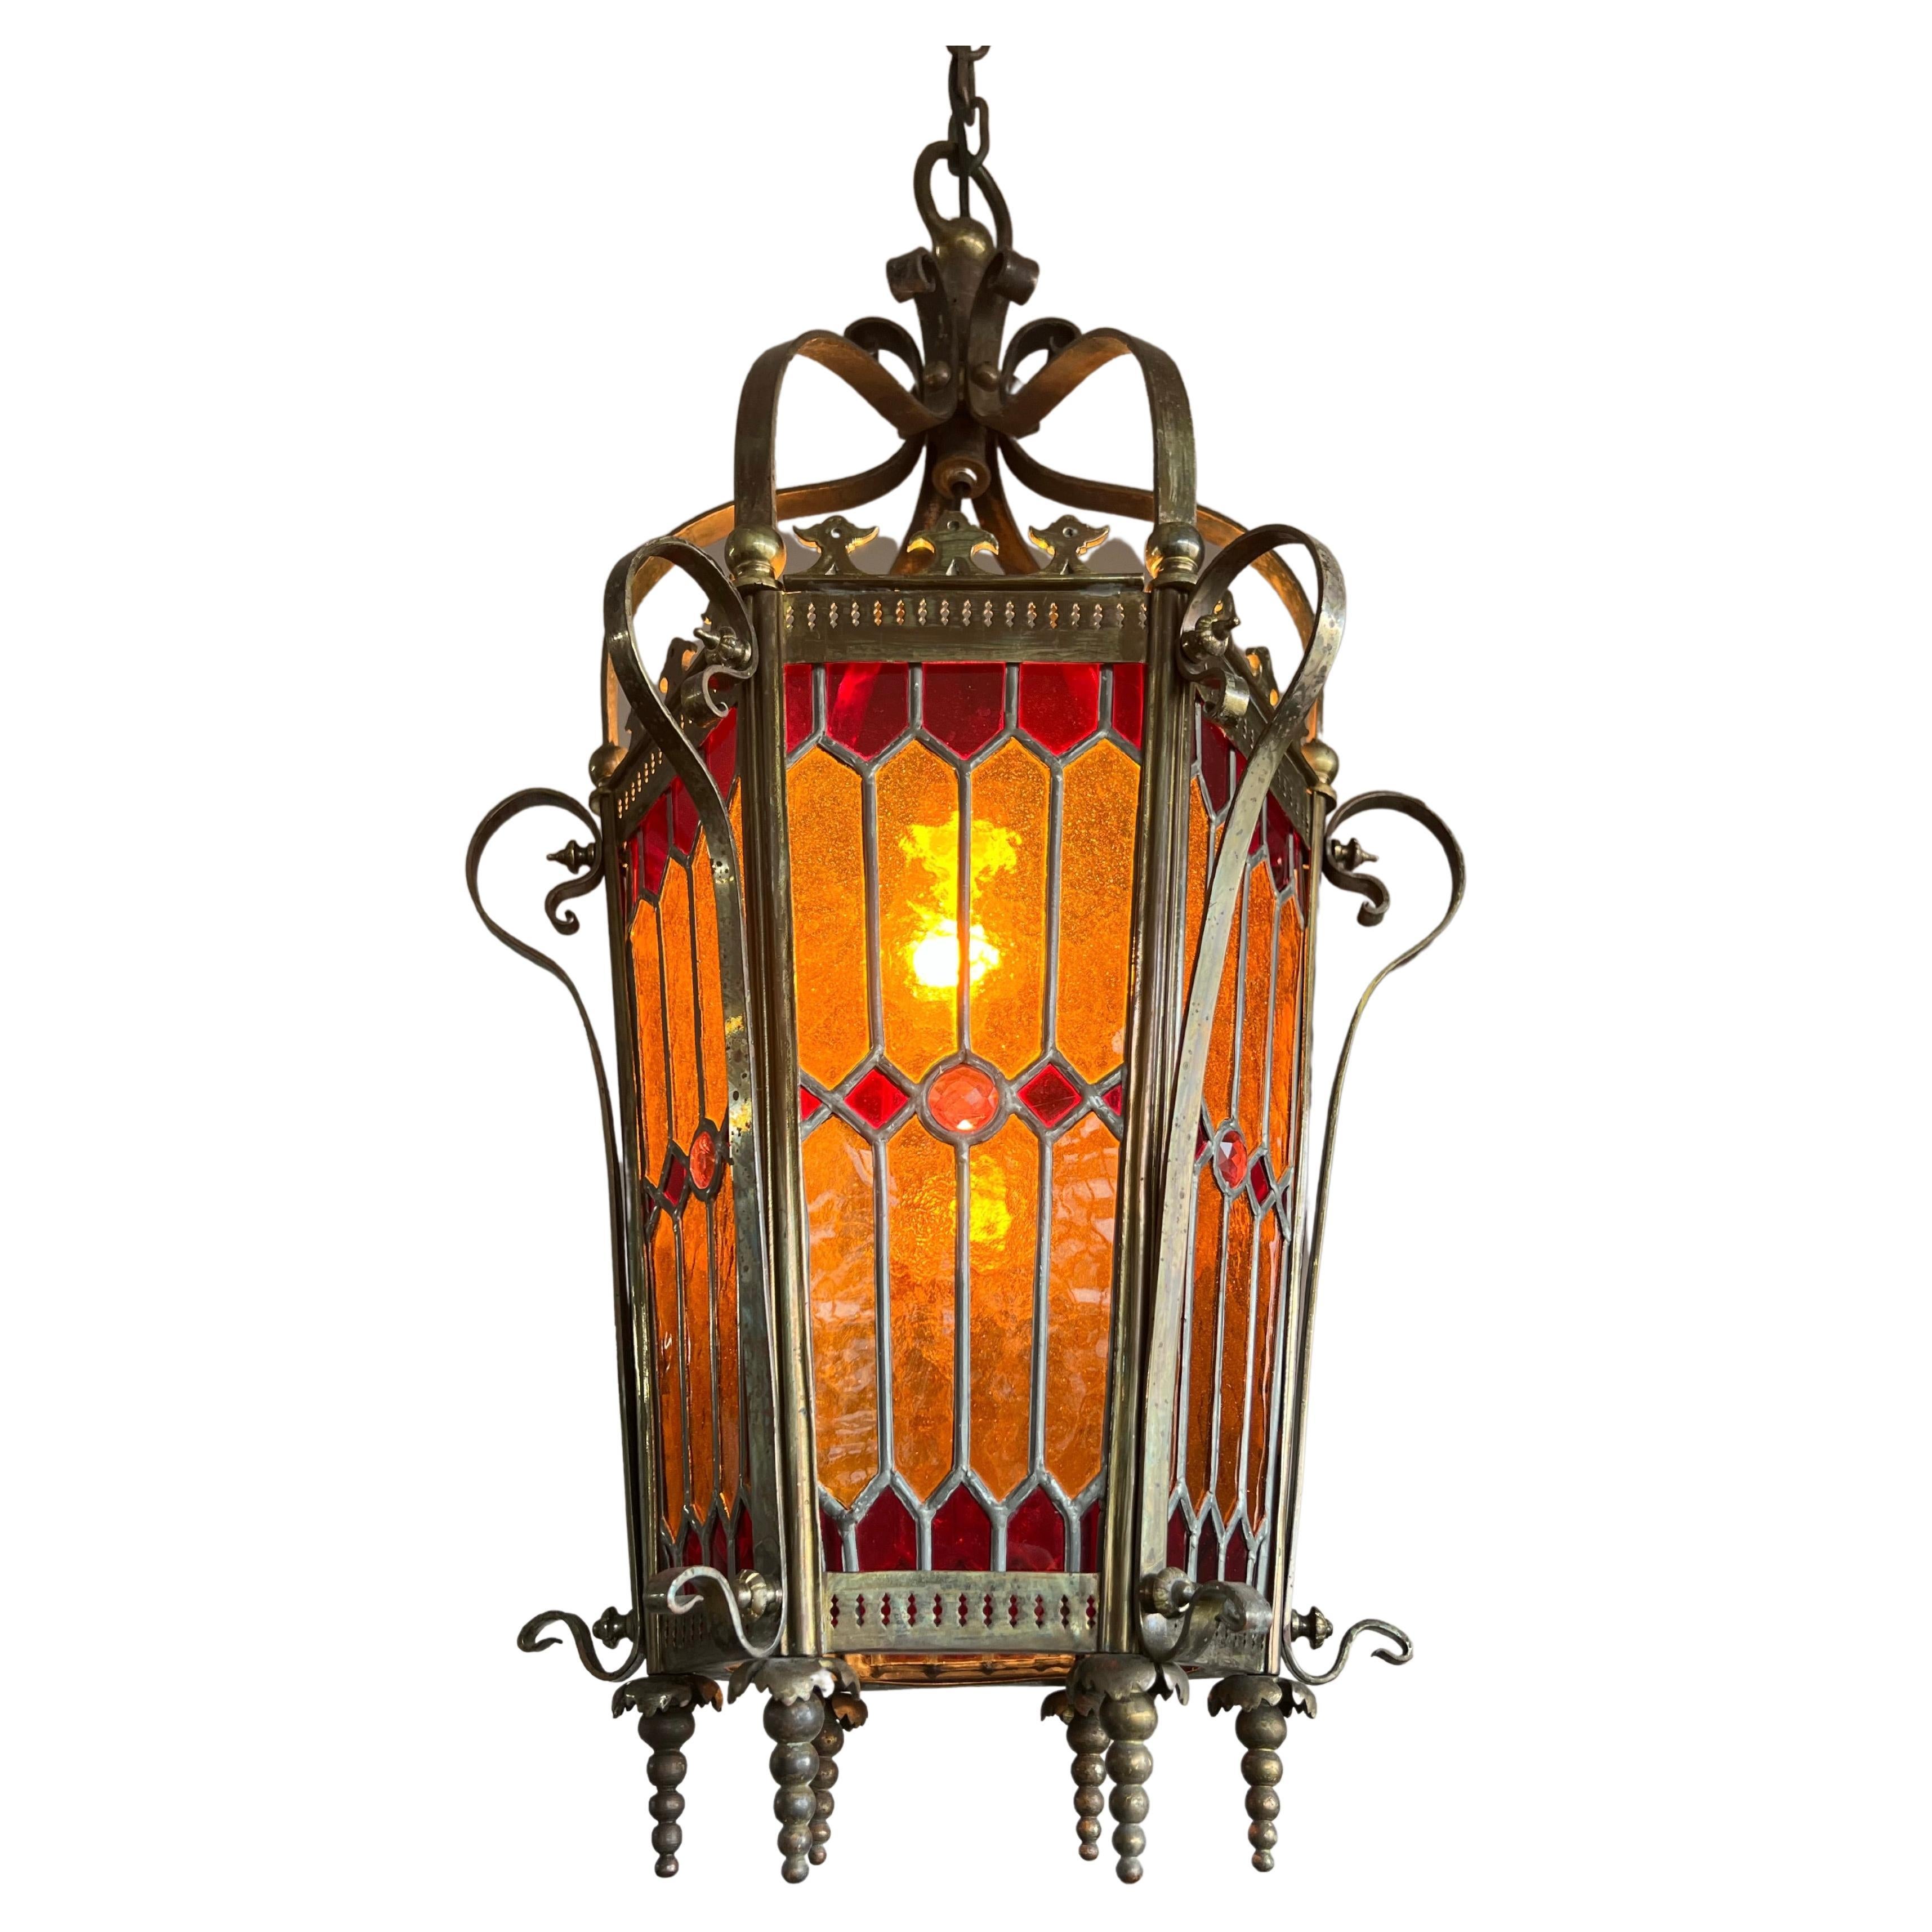 Stunning design and amazing colors Victorian pendant light for the perfect ambiance.

If you are looking for a rare, beautiful and all handcrafted antique lantern then this unique specimen from the late 1800s could be the one for you. This